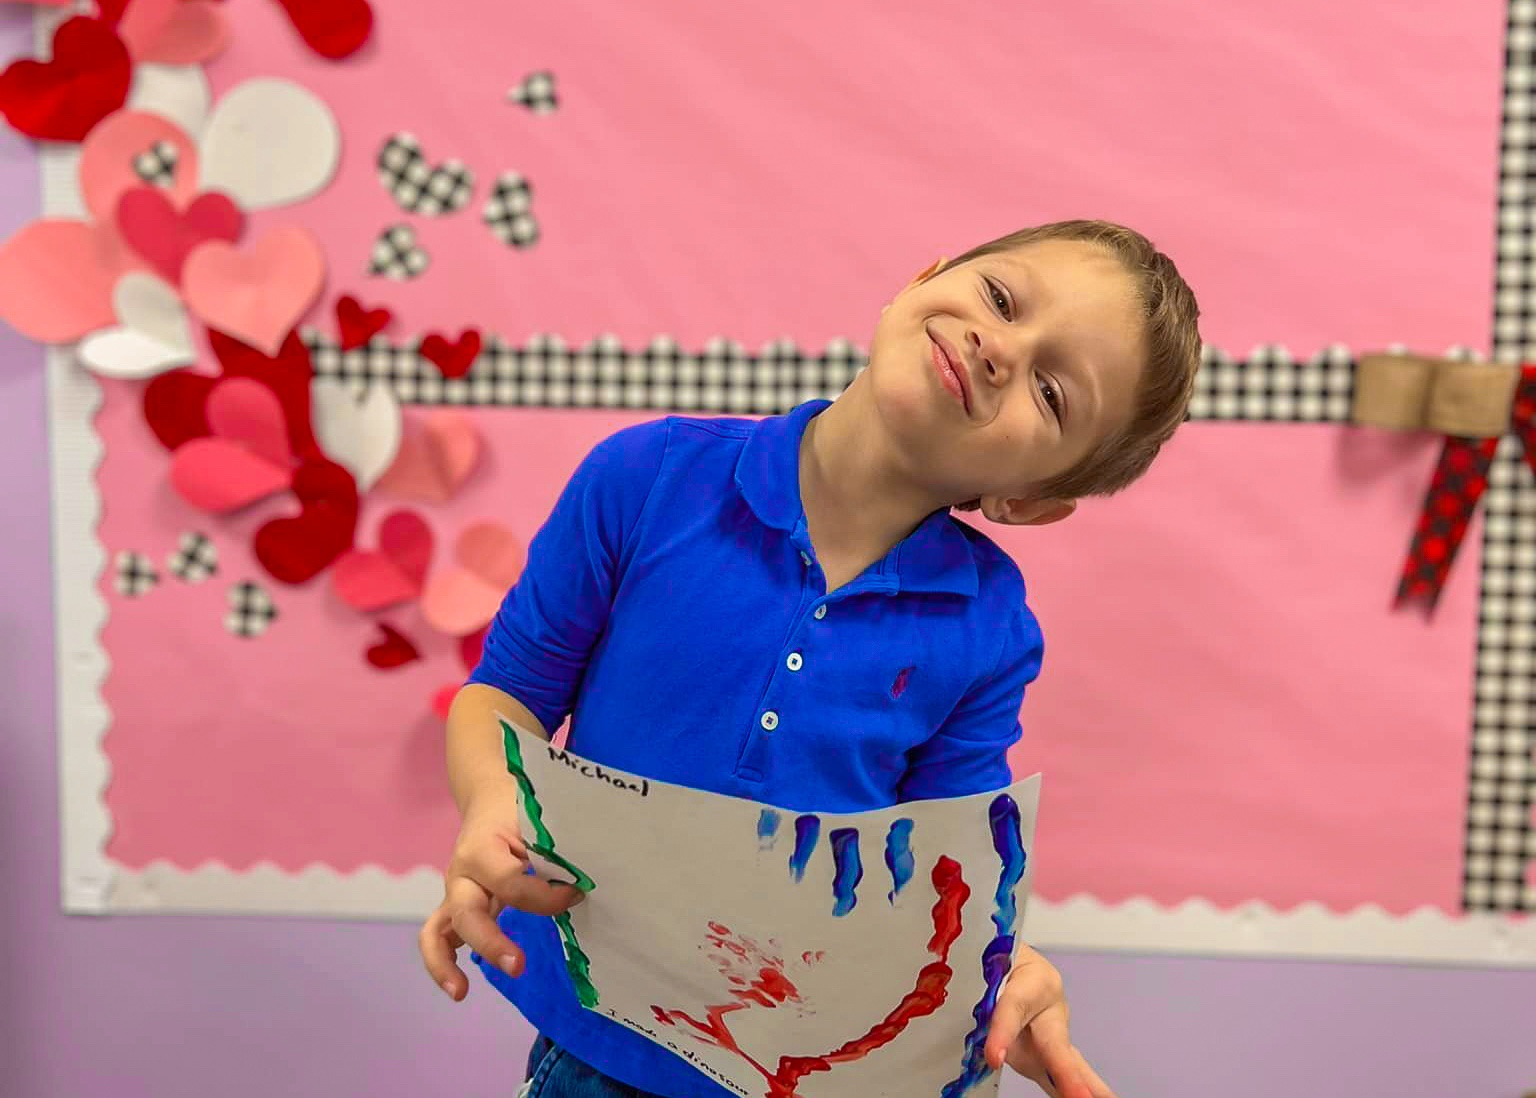 Smiling young boy in a blue shirt holding a colorful painting in a classroom with a pink and heart-decorated bulletin board